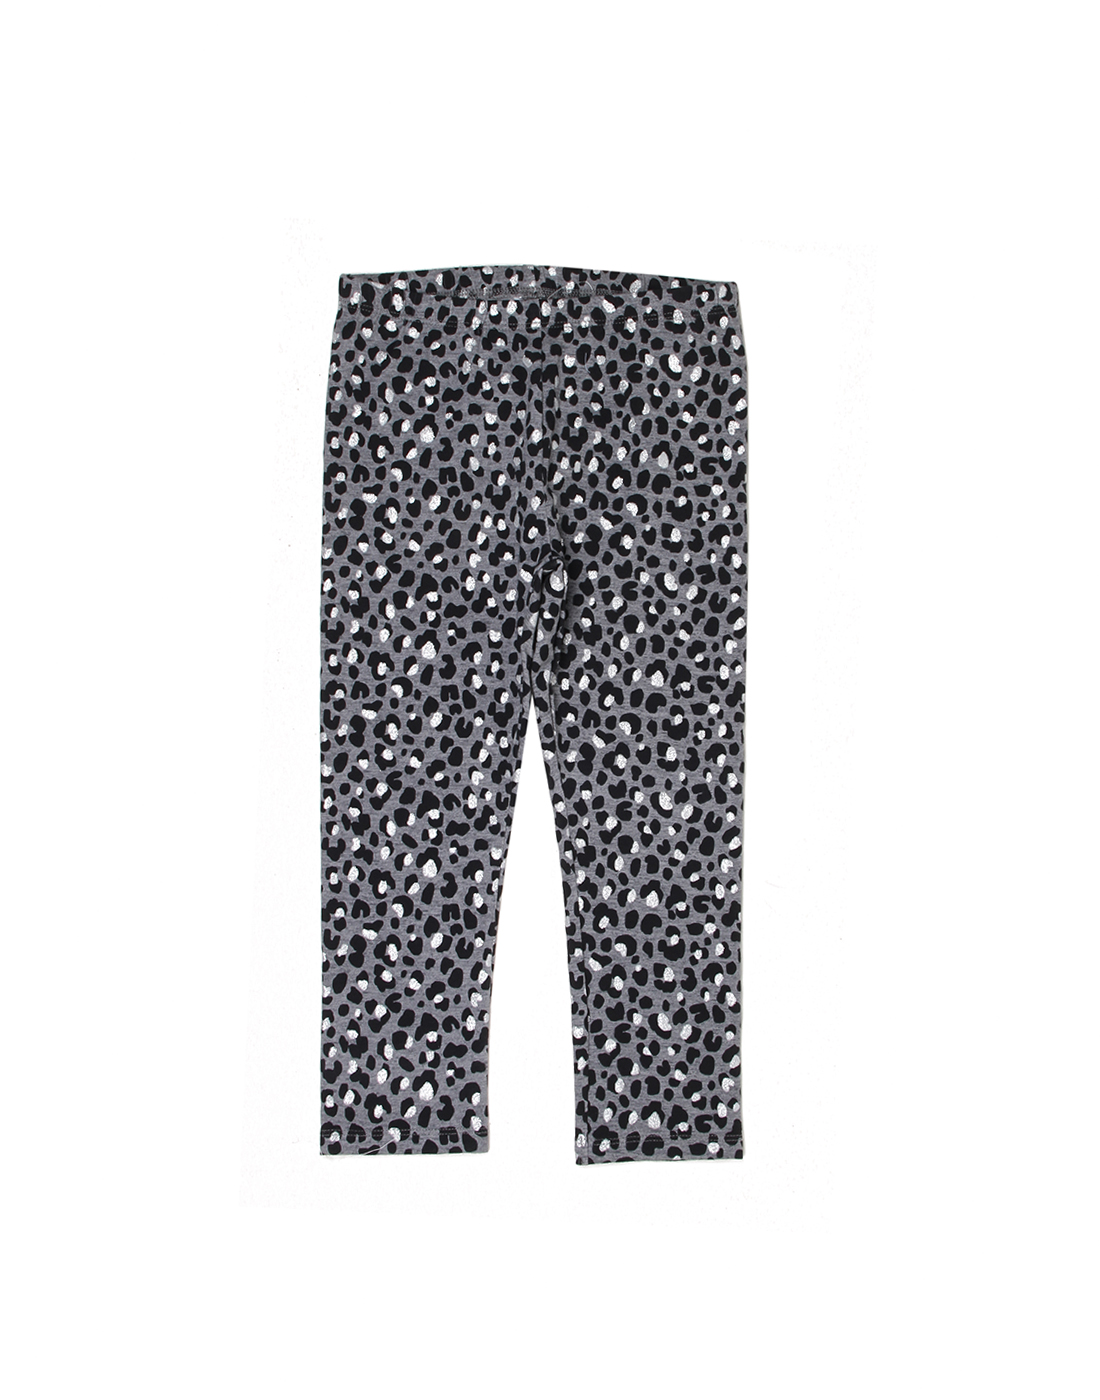 The Children's Place Girls Printed Casual Wear Leggings